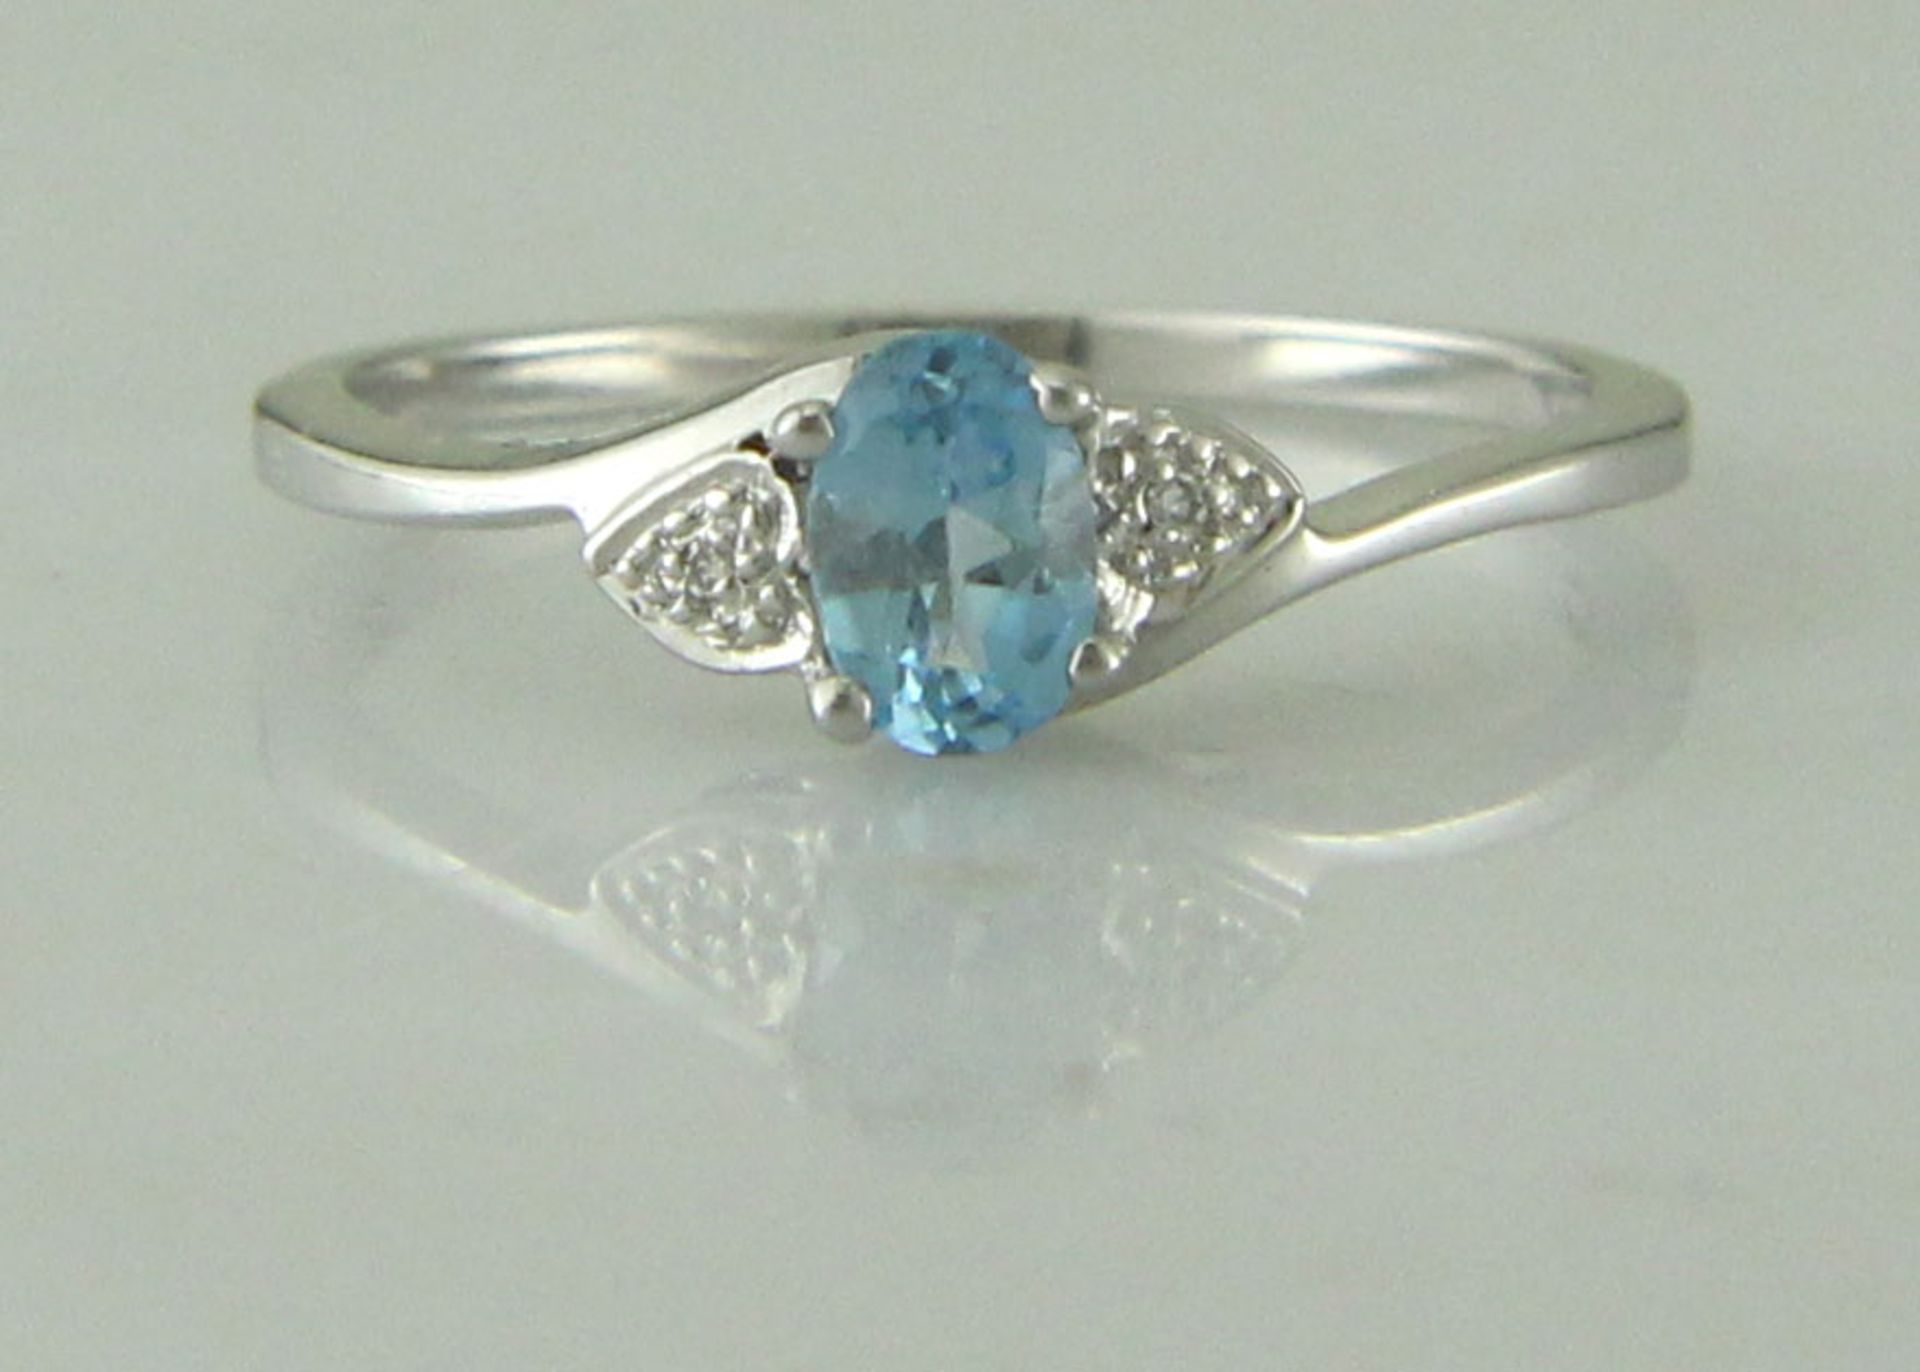 9ct White Gold Fancy Cluster Diamond Blue Topaz Ring 0.01 Carats - Image 5 of 5